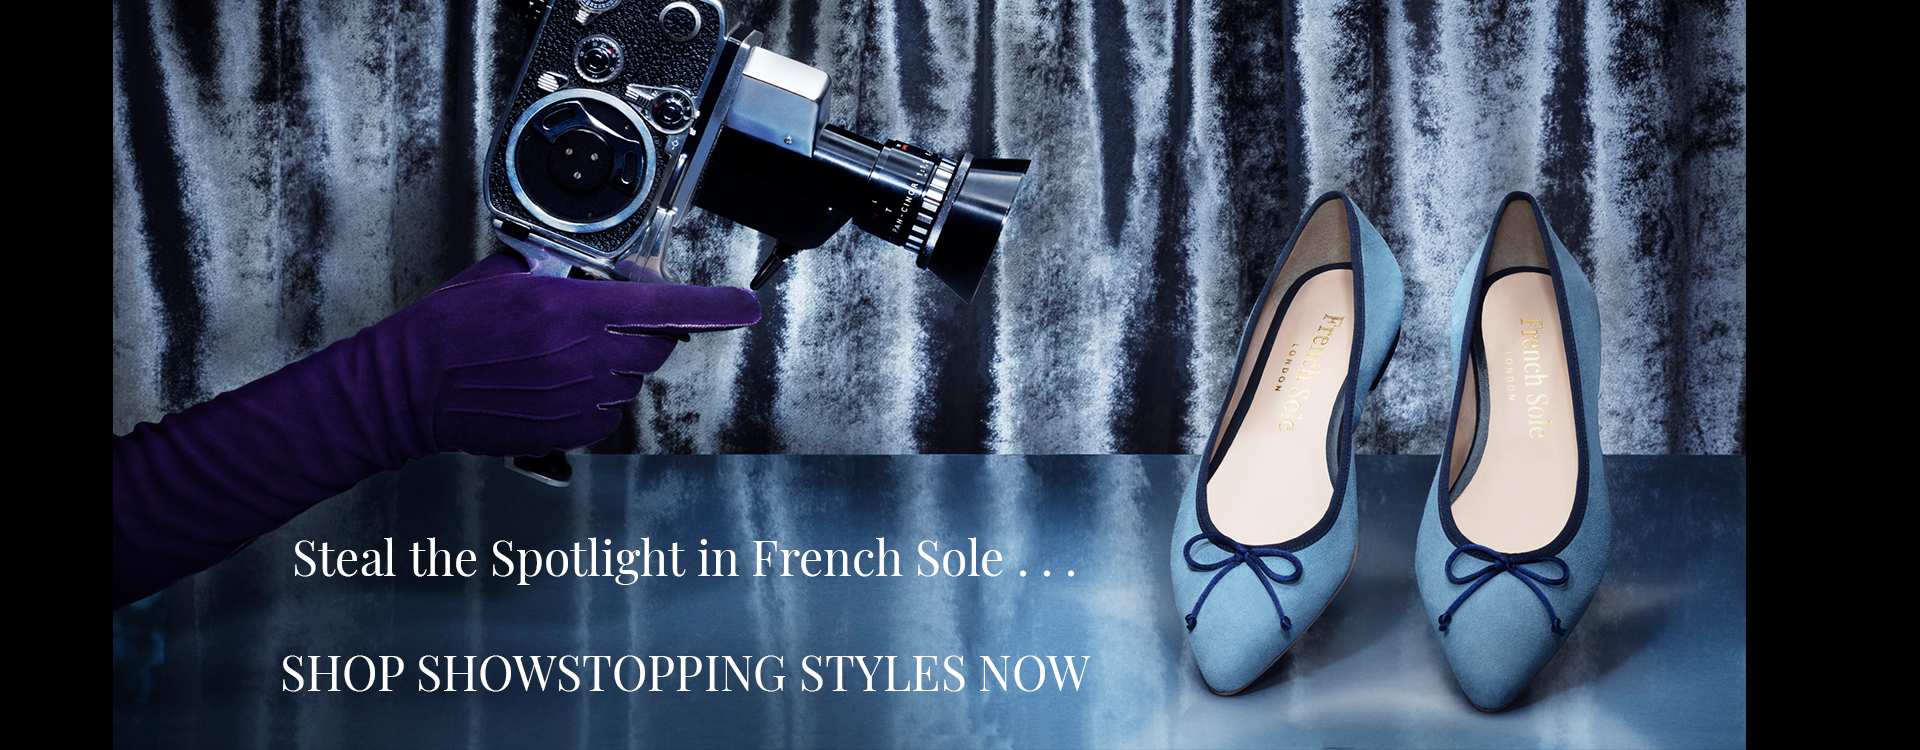 french sole shoes sale